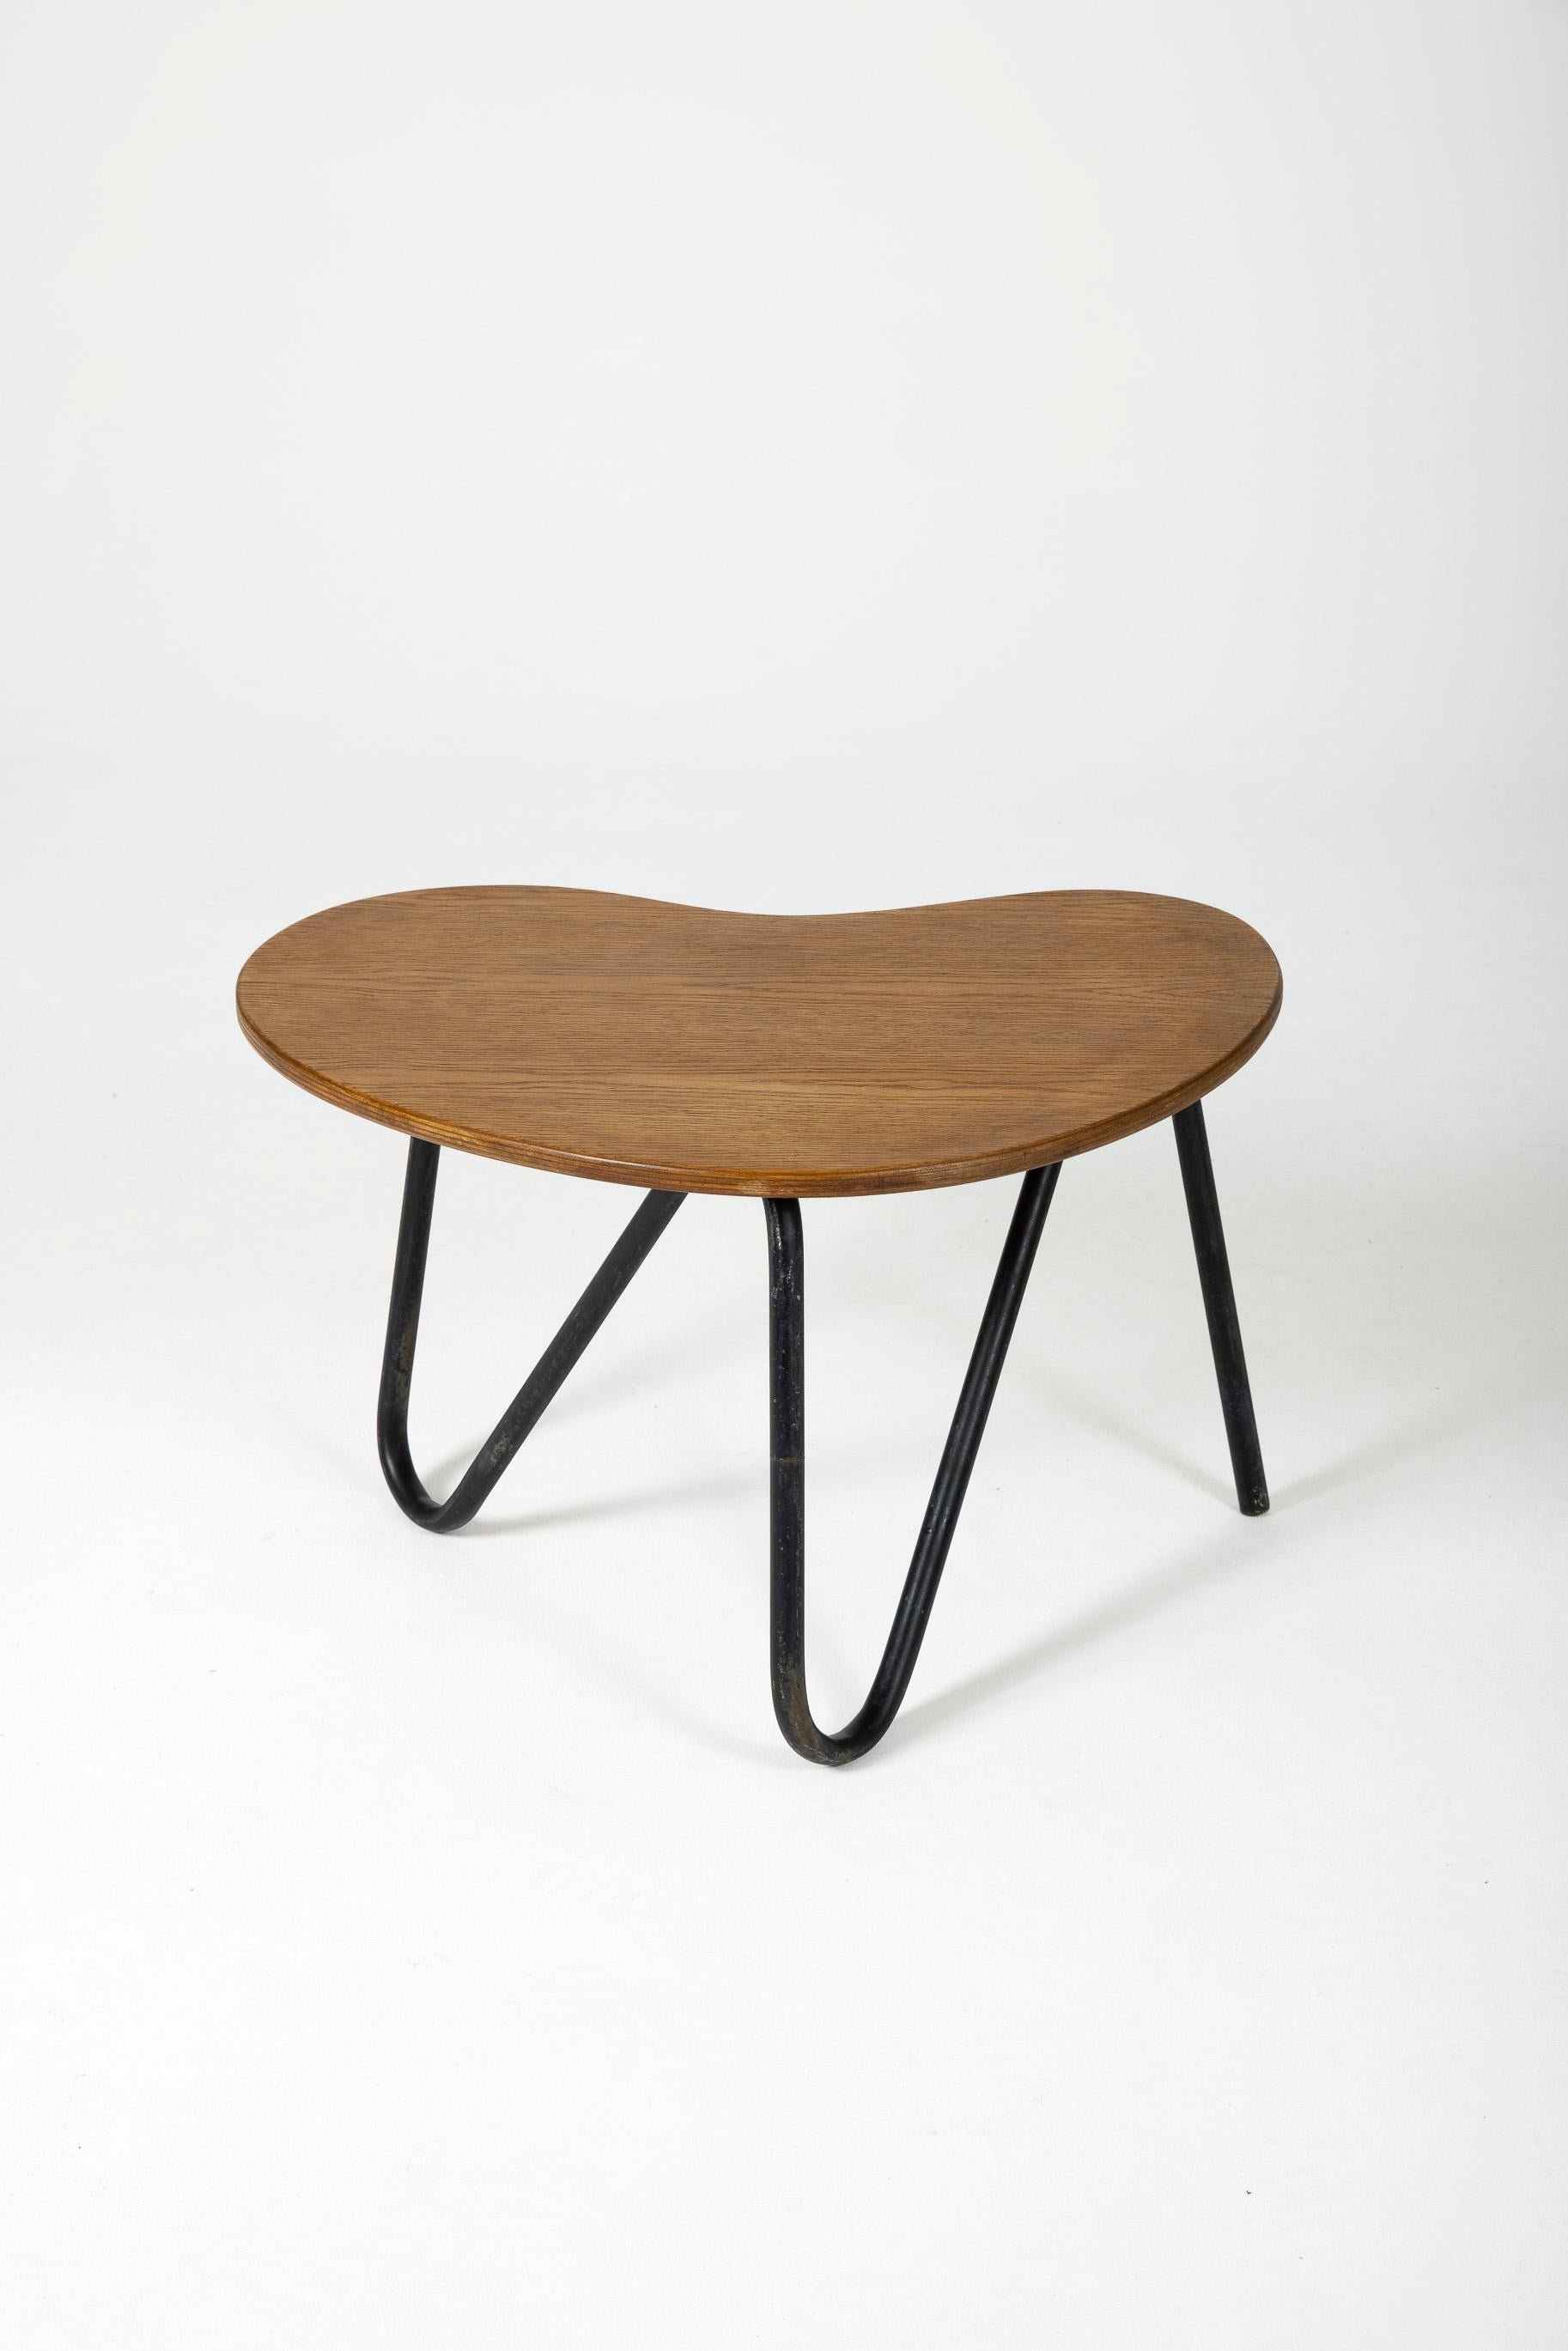 Coffee table in wood by Perfacto Pierre Guariche 1